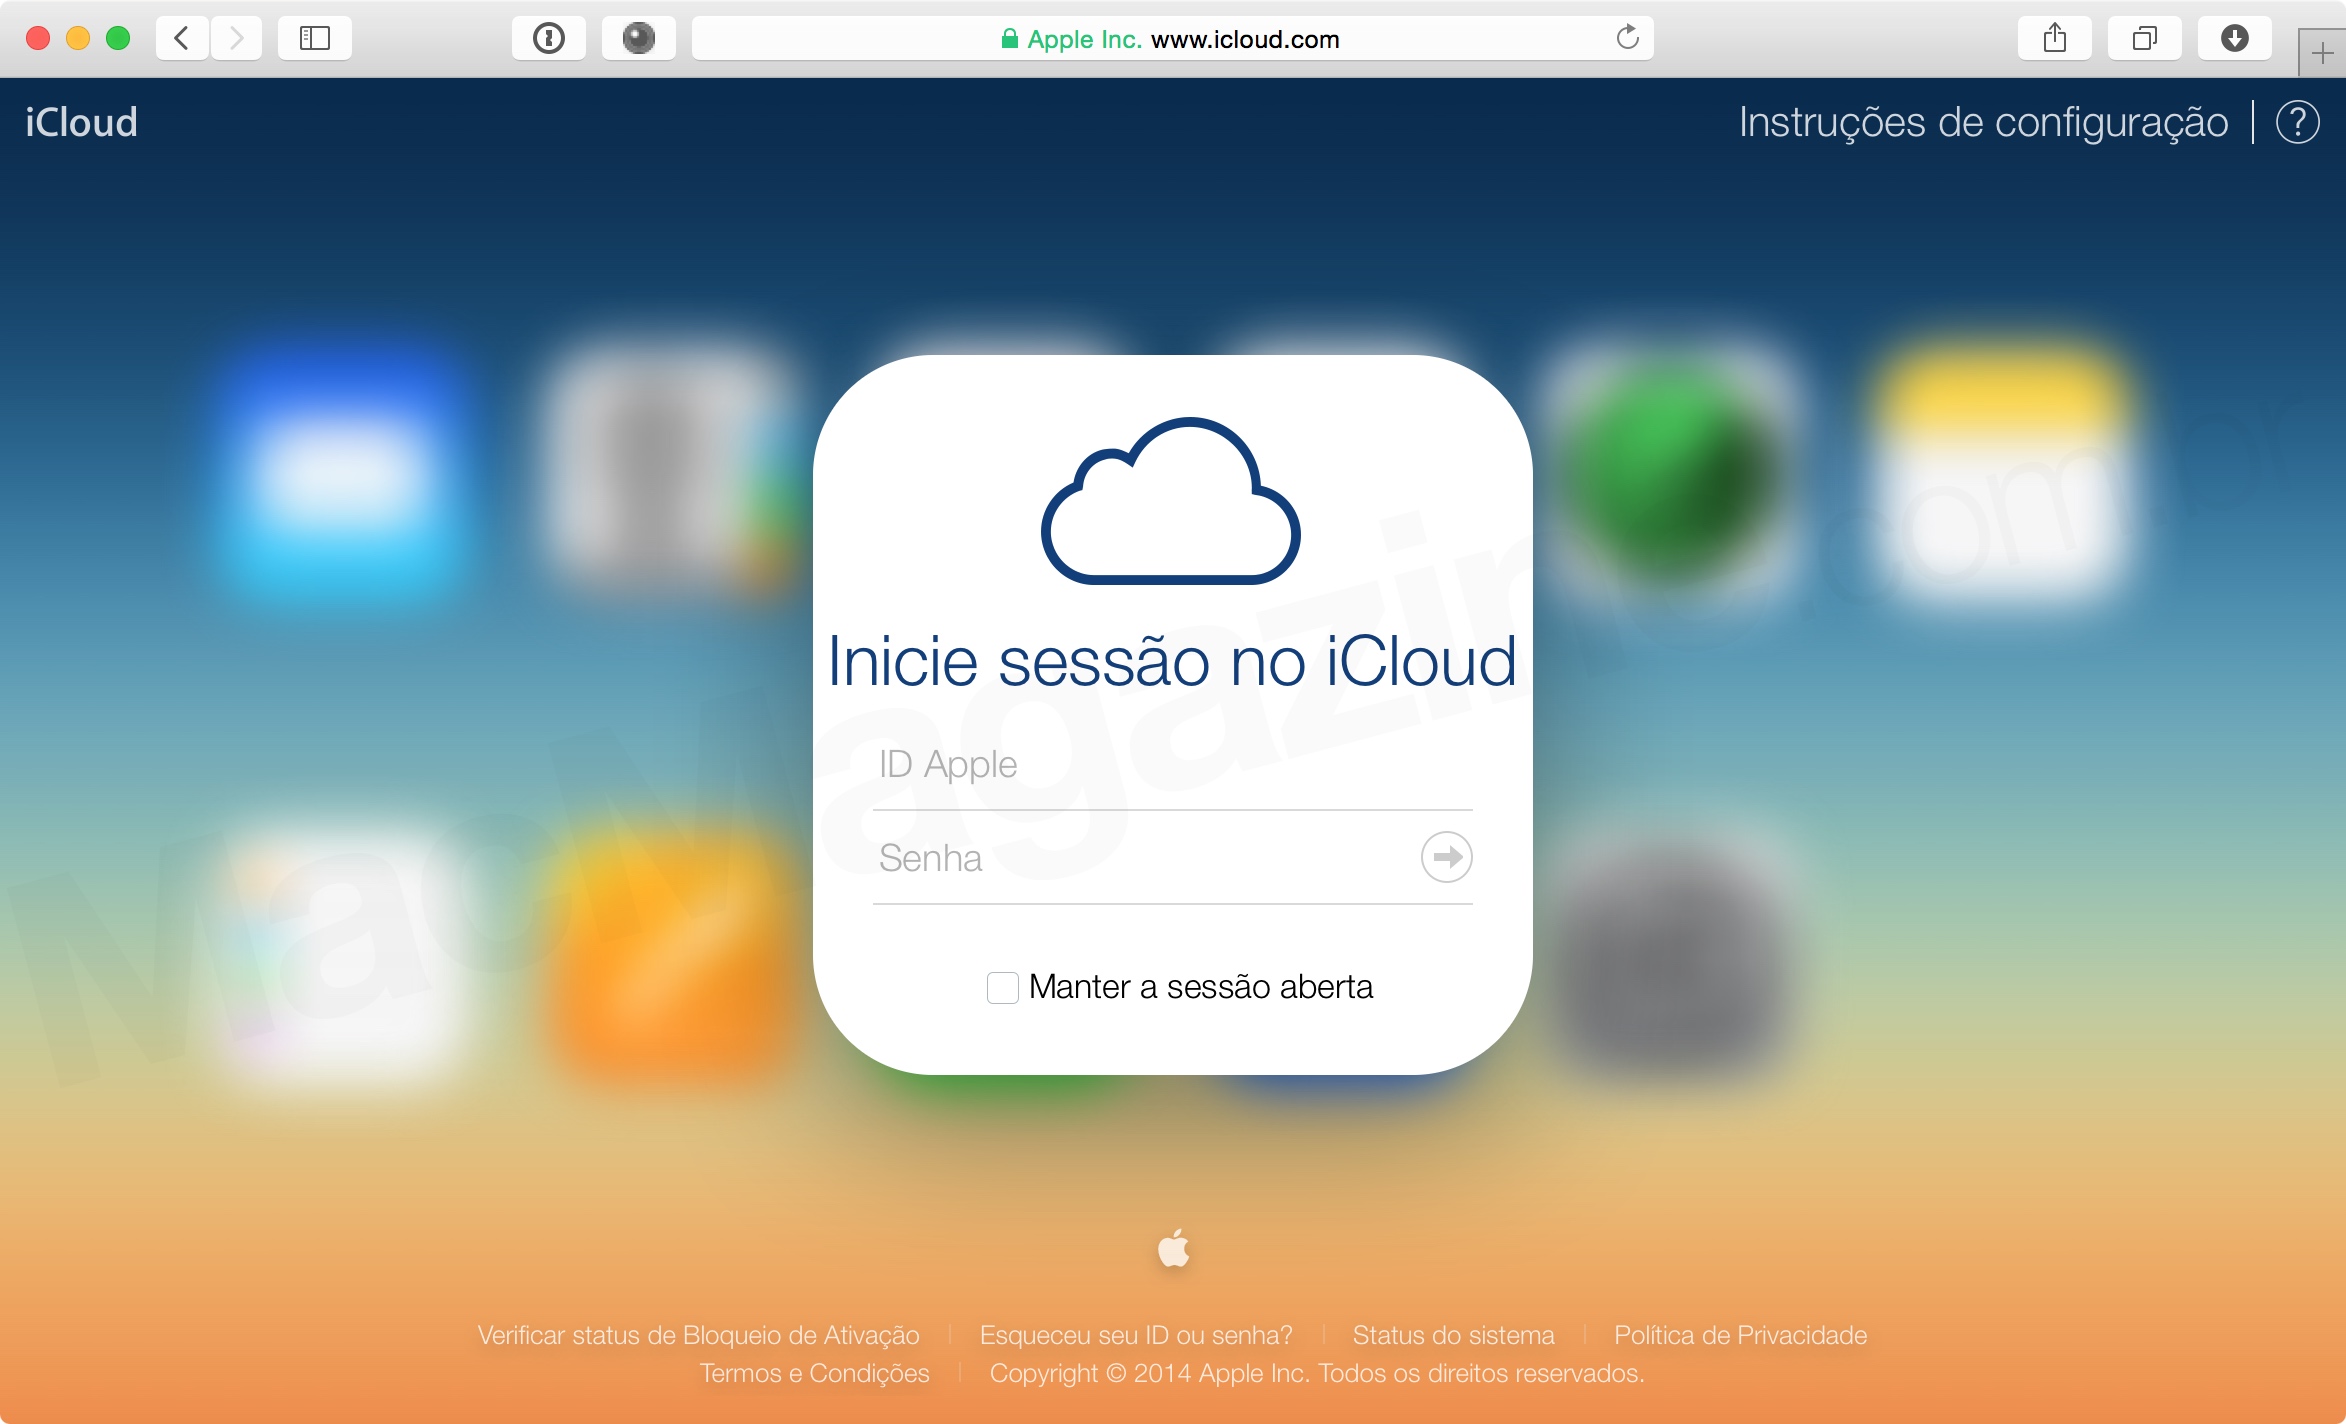 Software used to hack iCloud accounts supports two-step verification [atualizado]